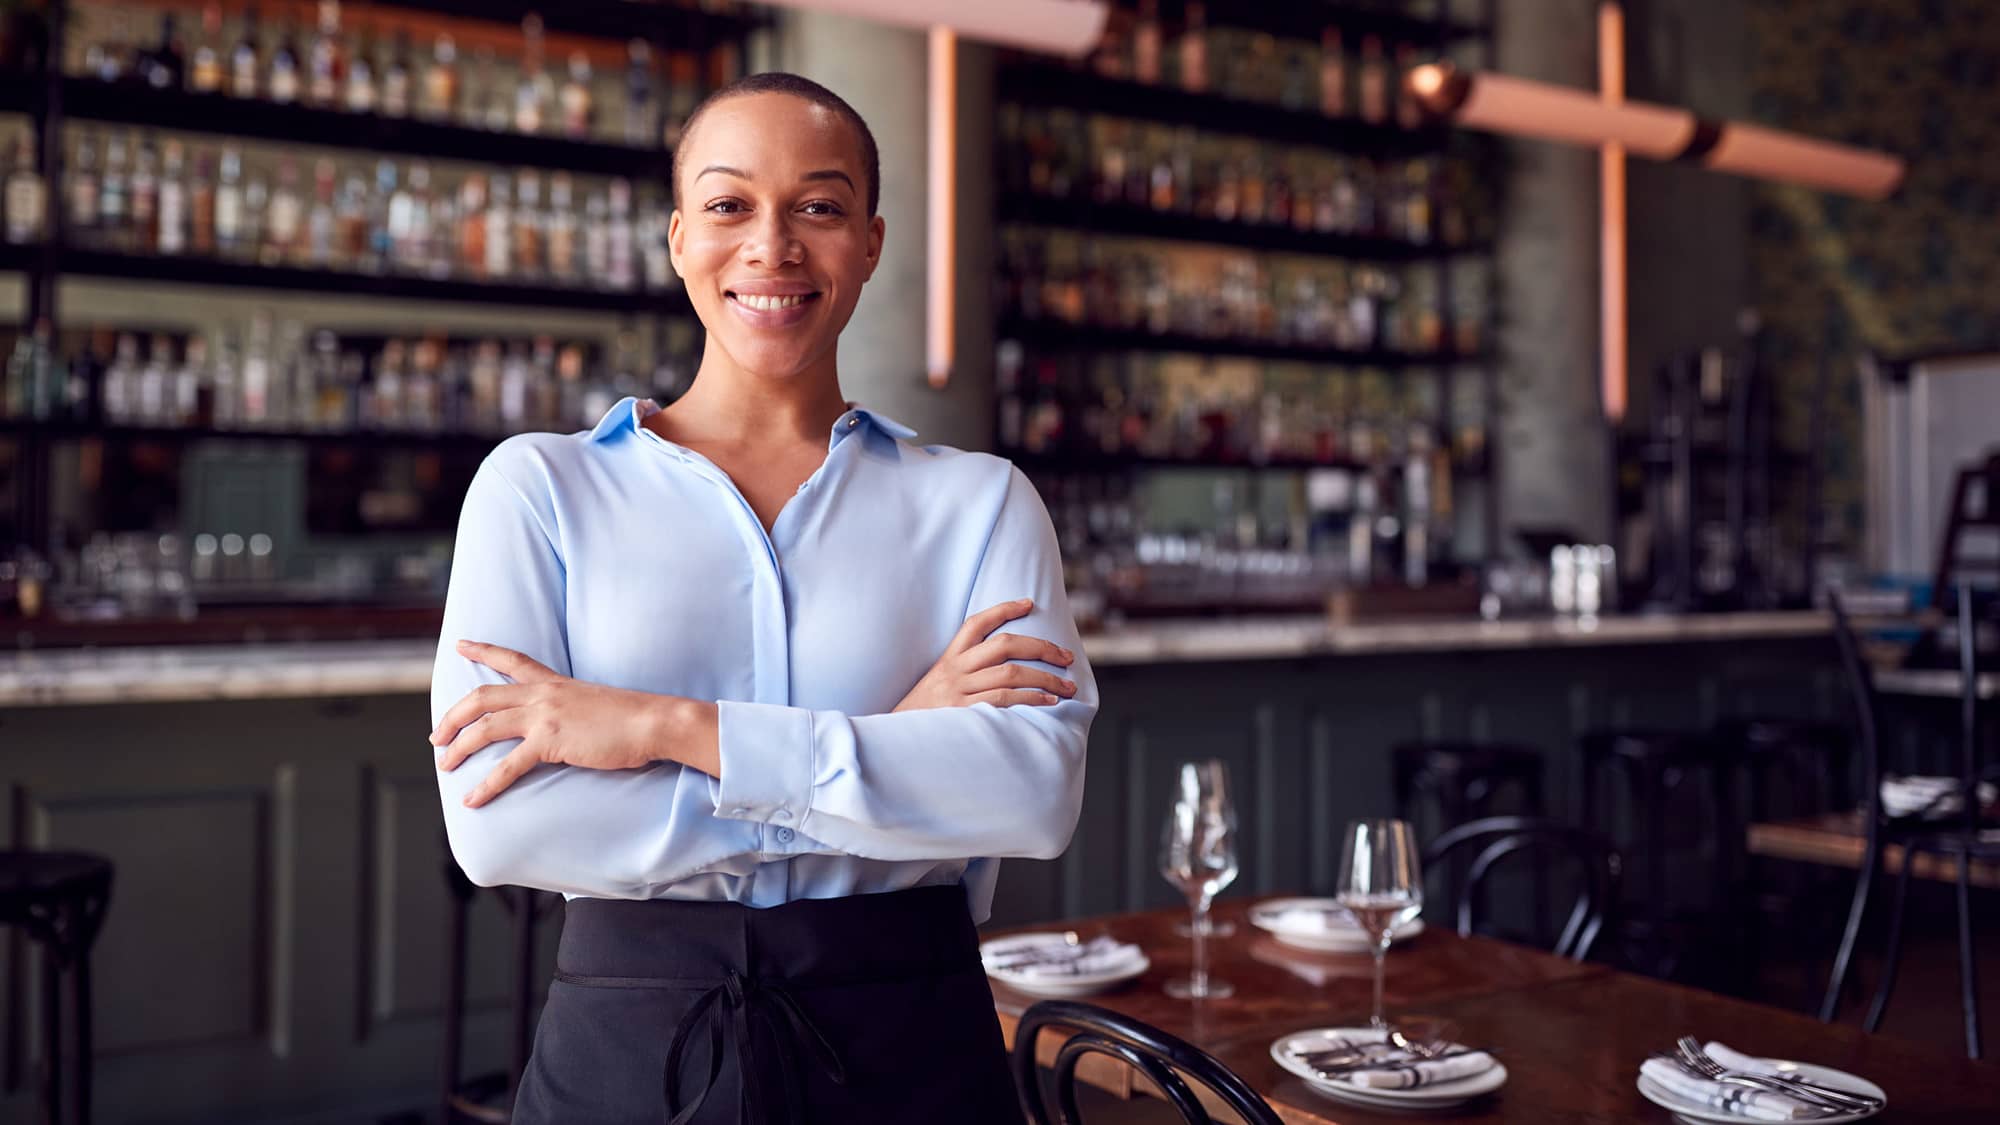 Restaurant owner standing proudly in front of tables and bar.